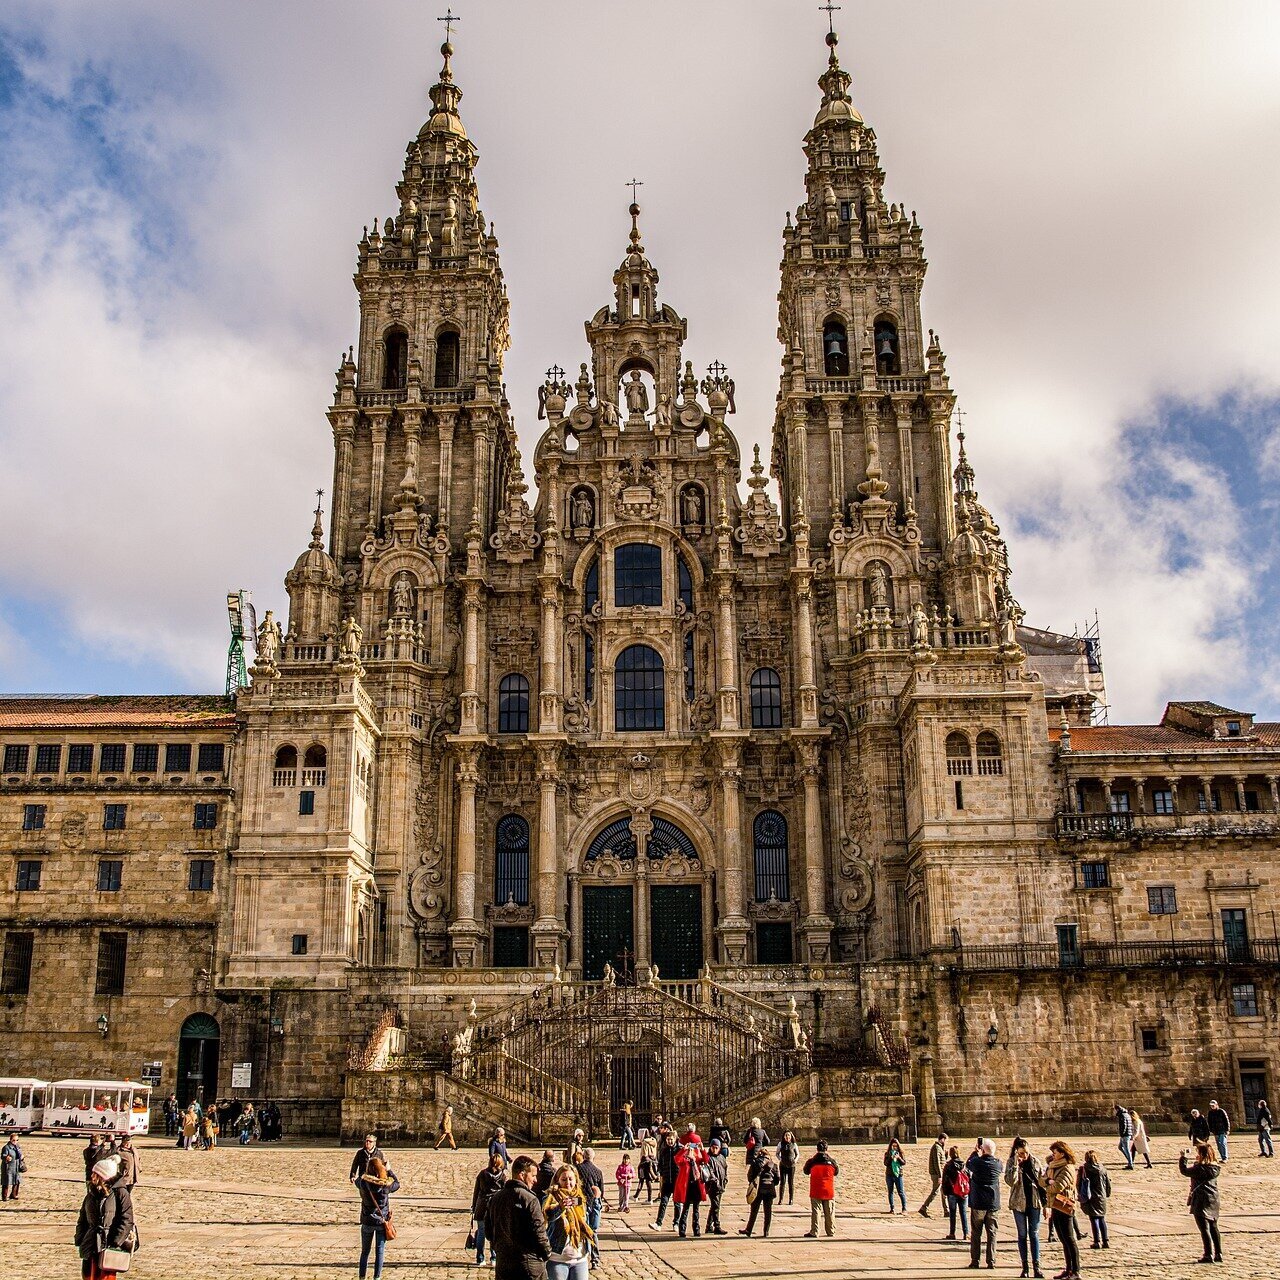 Cathedral in Santiago de Compostela. Photo by javierAlamo on Pixabay